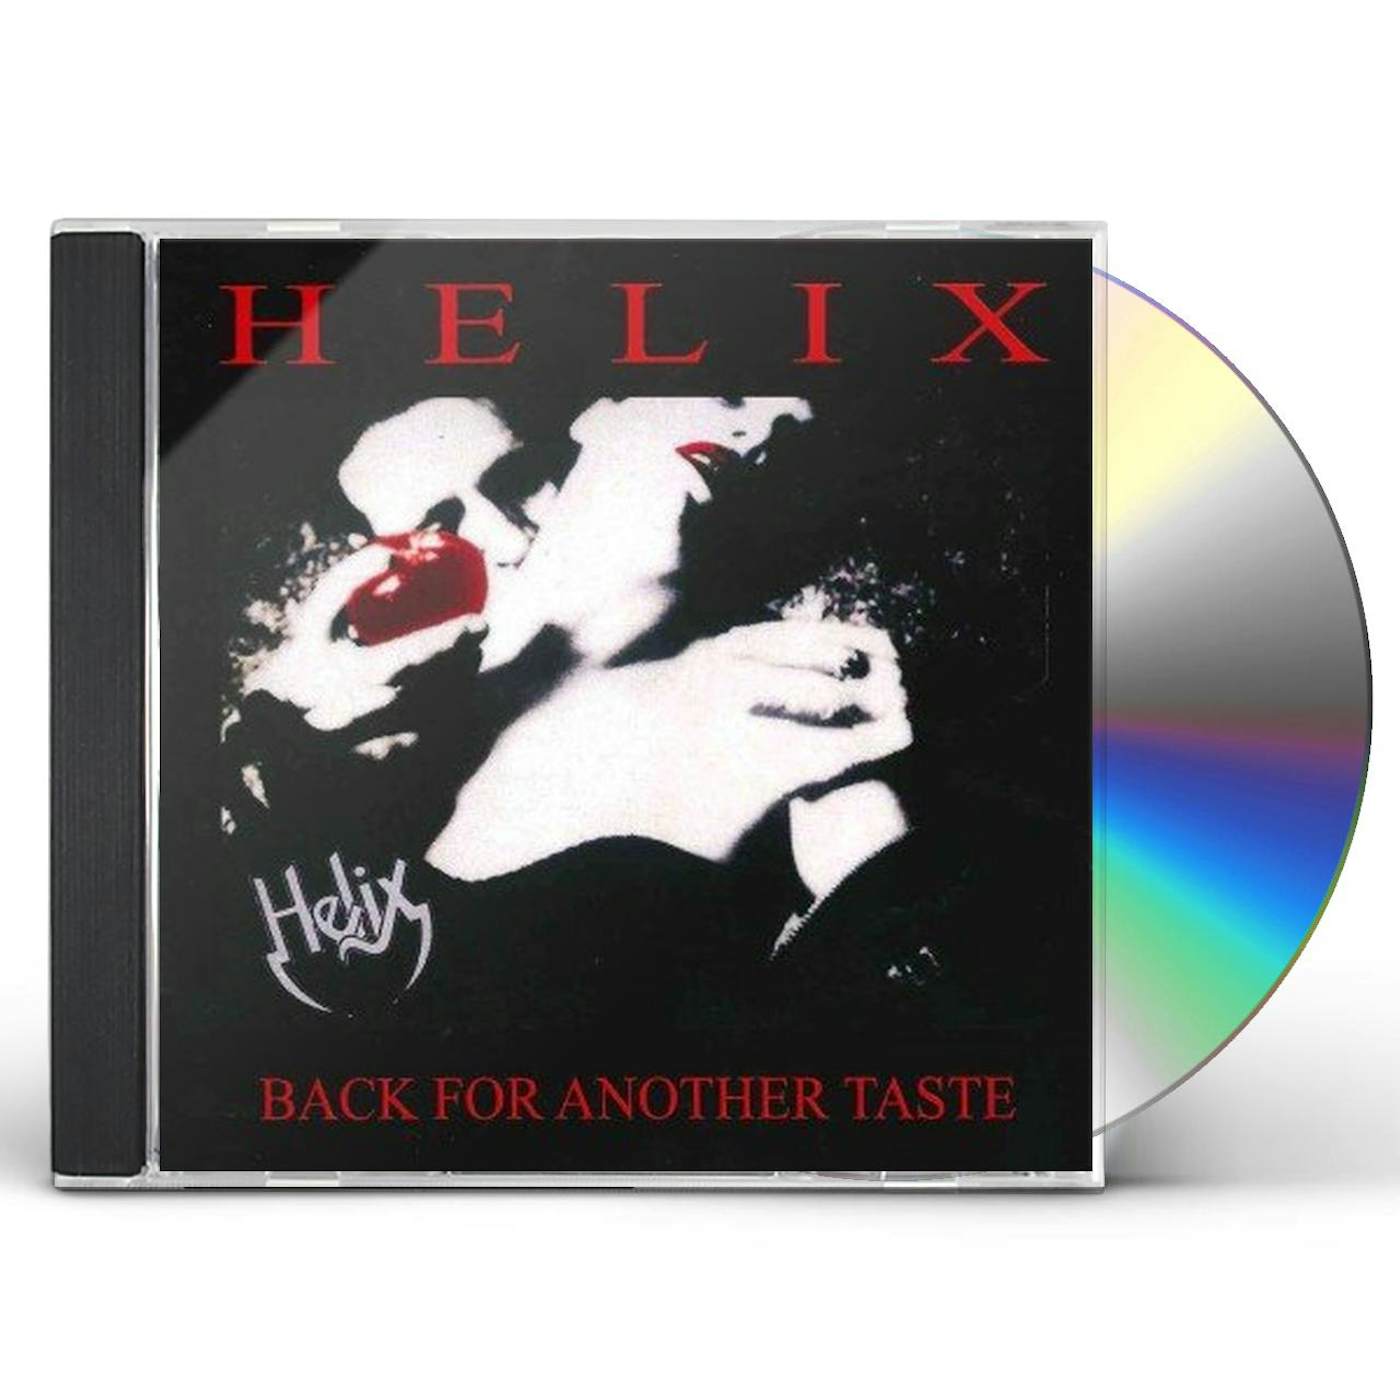 Helix BACK FOR ANOTHER TASTE CD